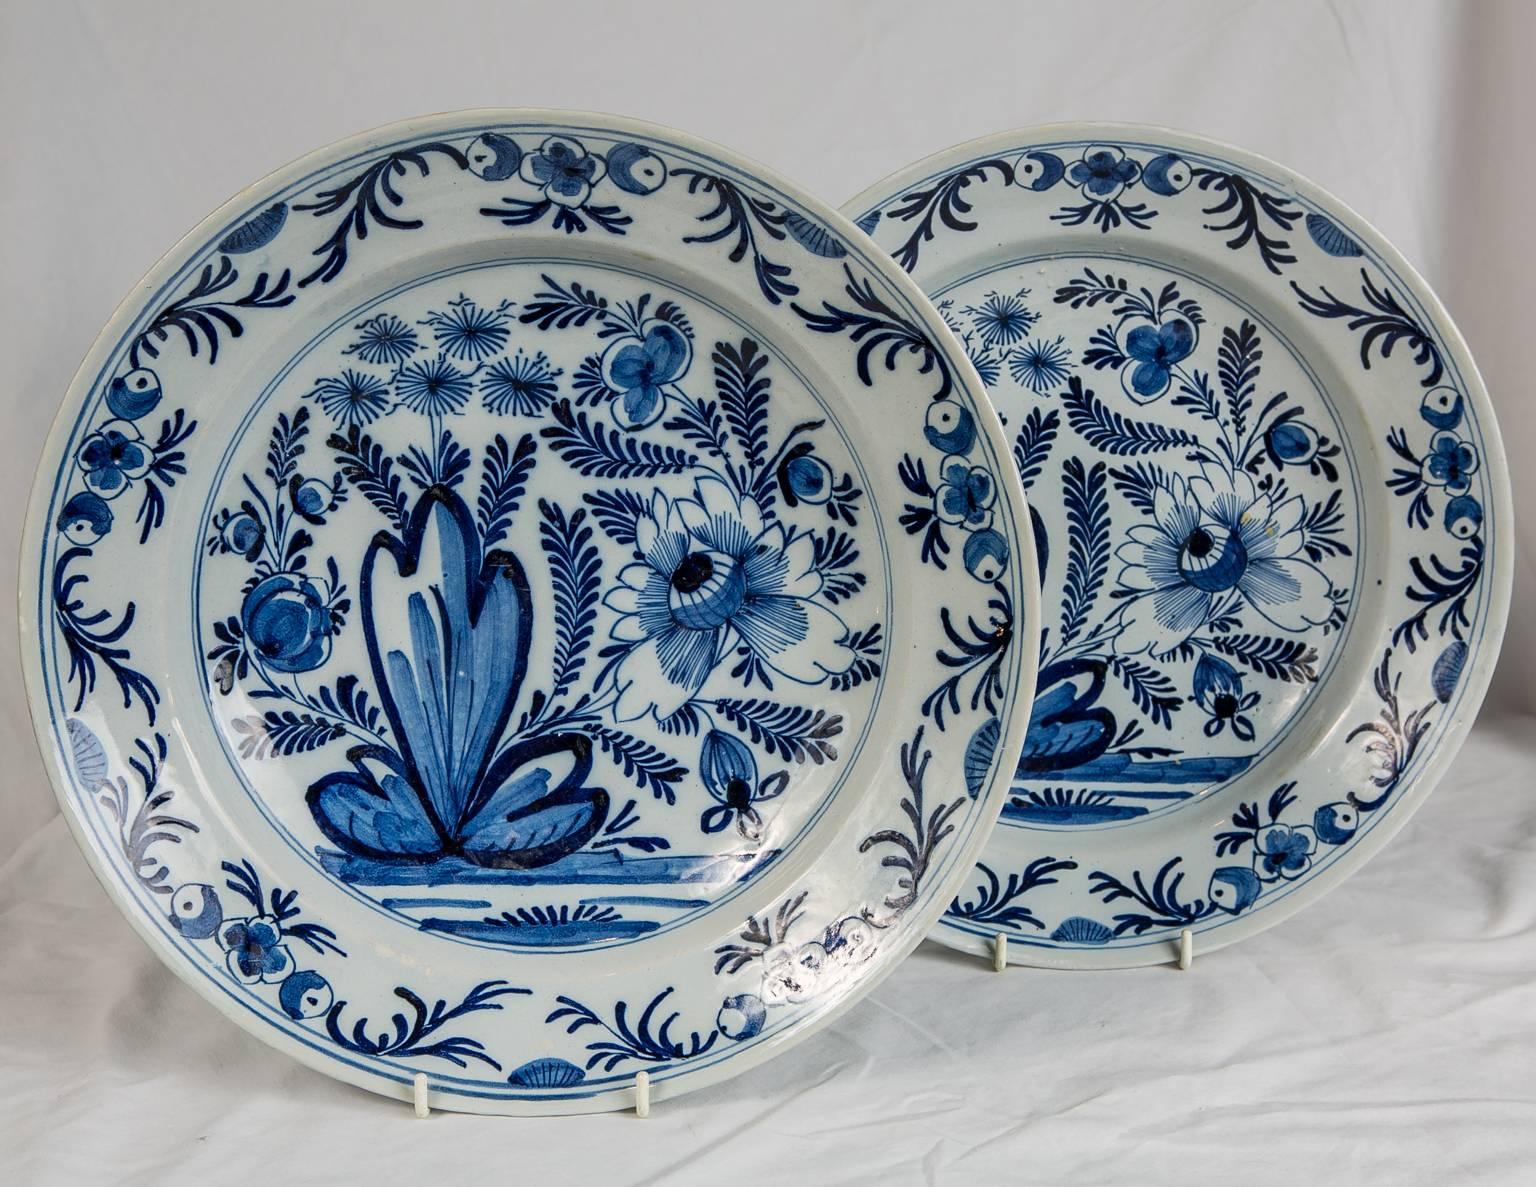 We are pleased to offer this pair of Dutch Delft Blue and White chargers showing a hand-painted cobalt blue garden scene with a large flowering plant, peonies and other flowers. The border is decorated with flowers and scrolling vines. The design is